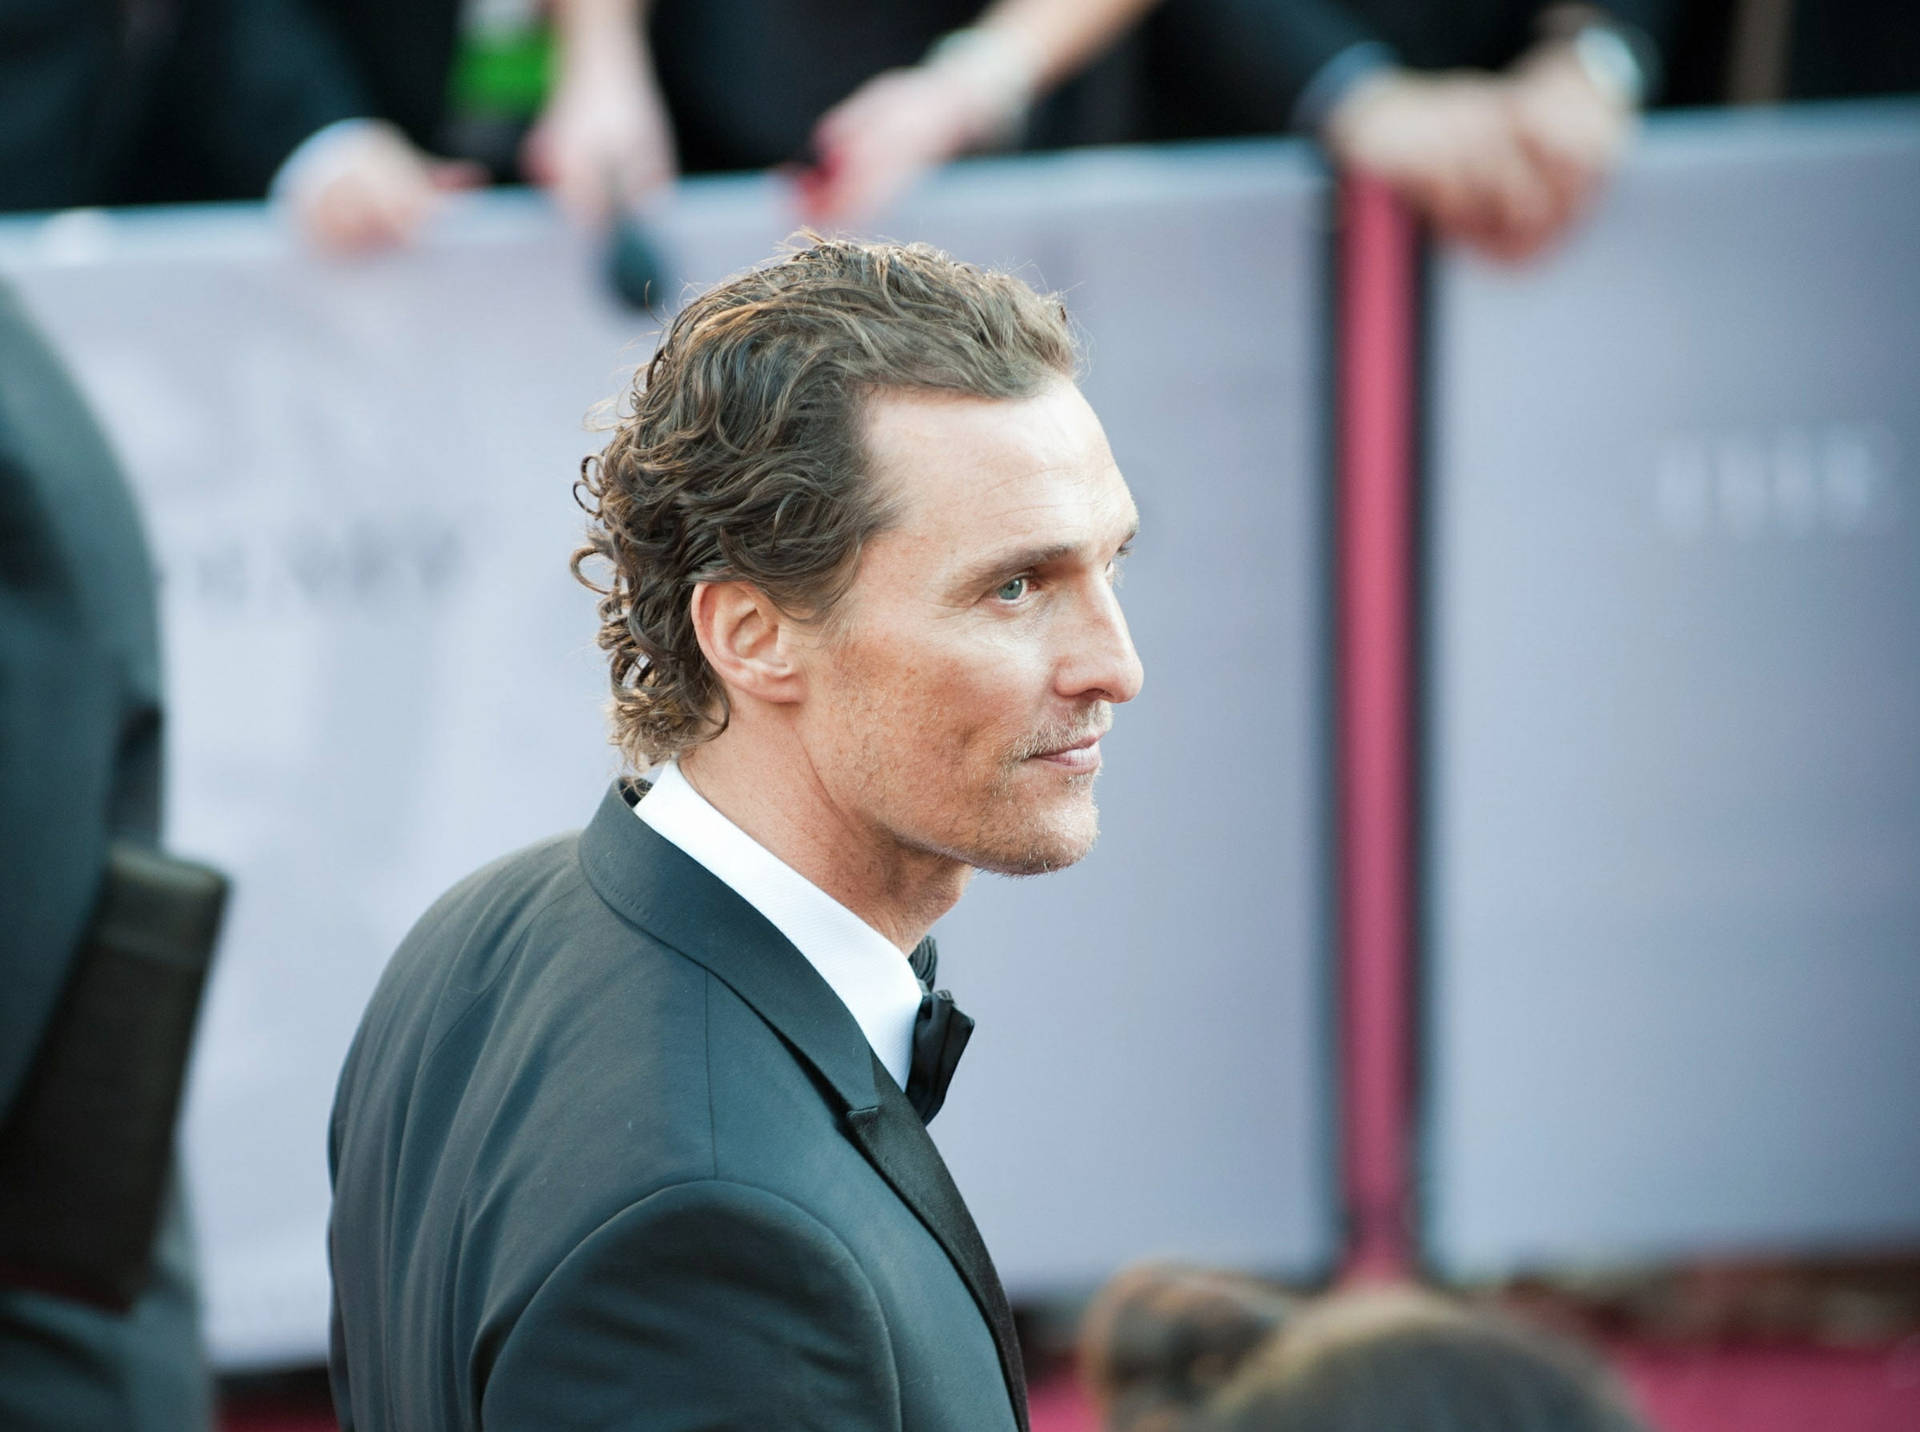 Hollywood Star Matthew Mcconaughey On The Red Carpet